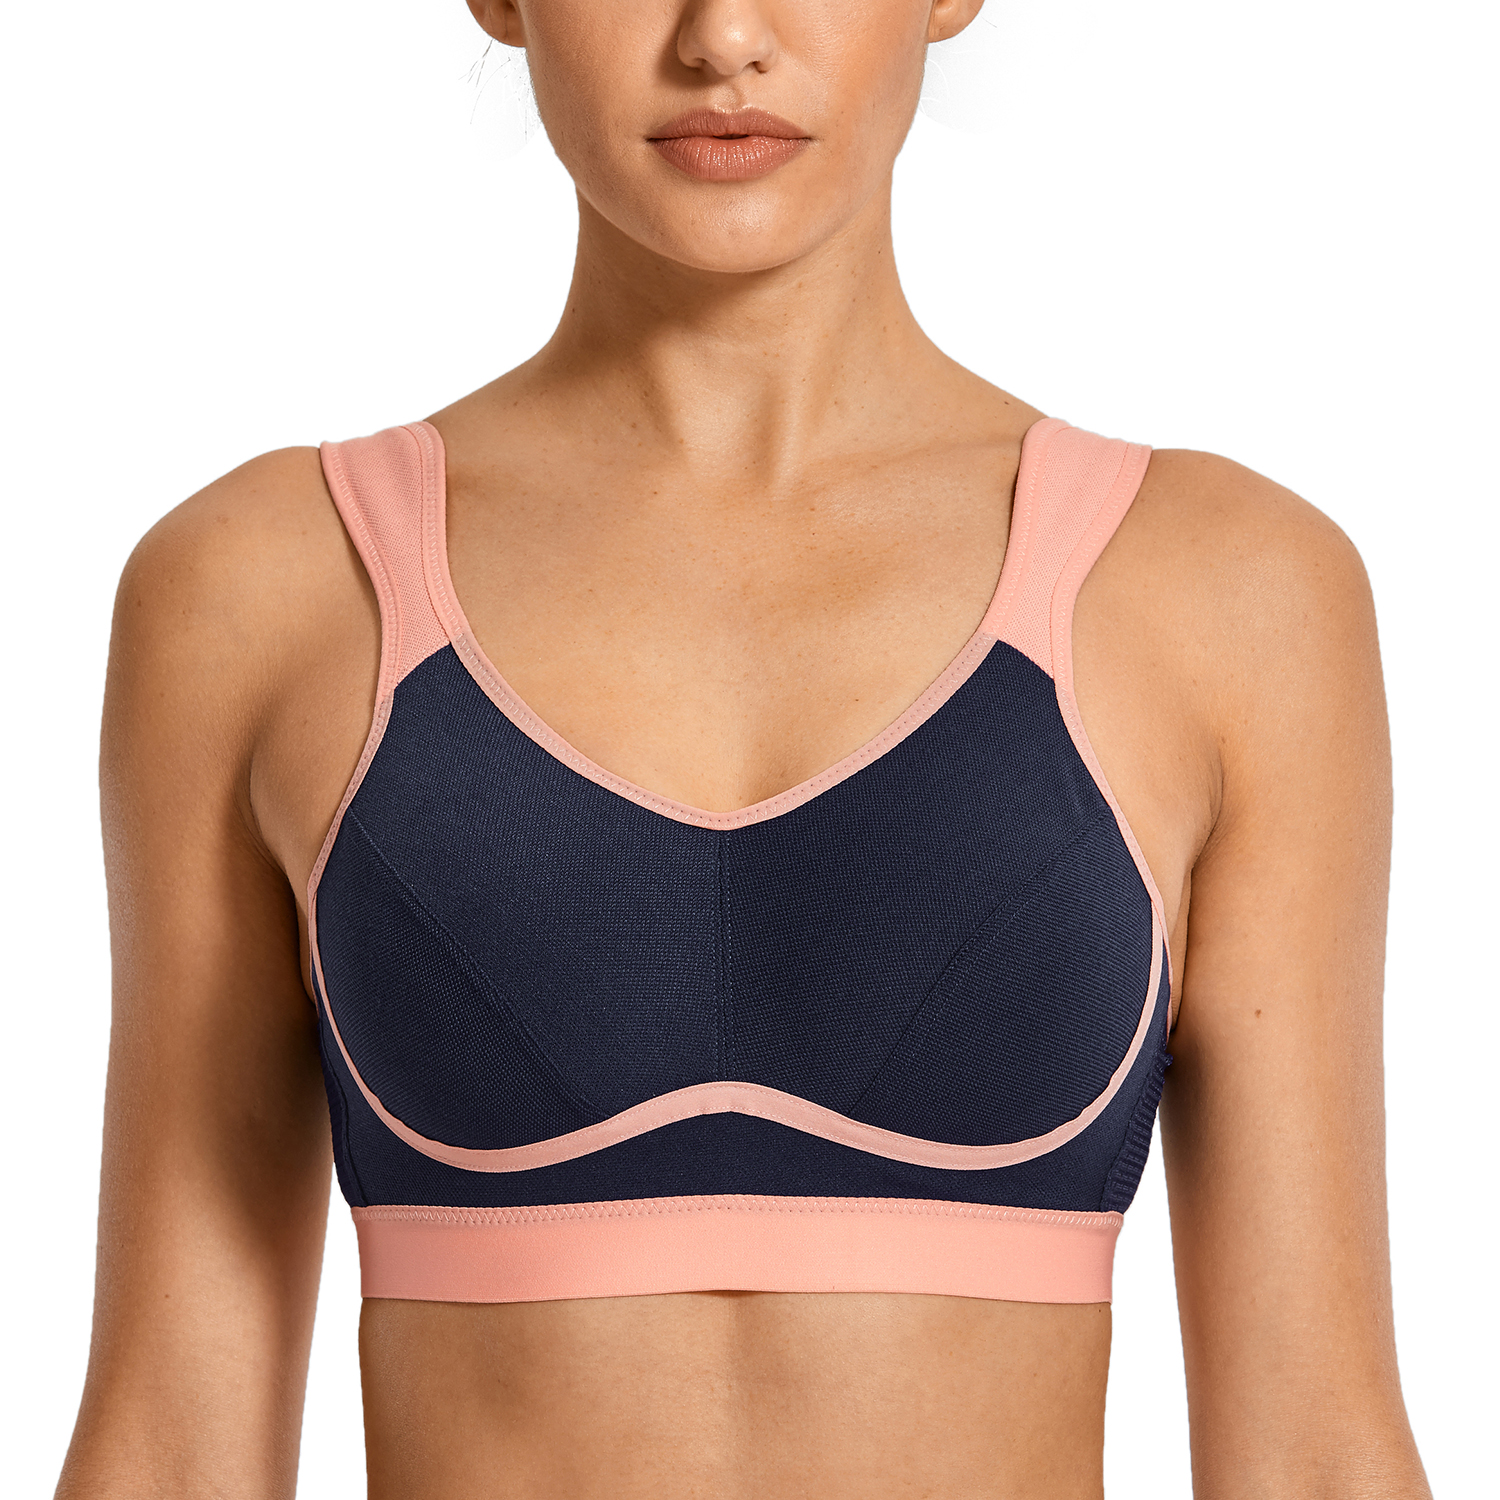 SYROKAN Women's Plus Size High Impact Sports Bra Full Cup Wirefree Workout  Bras 